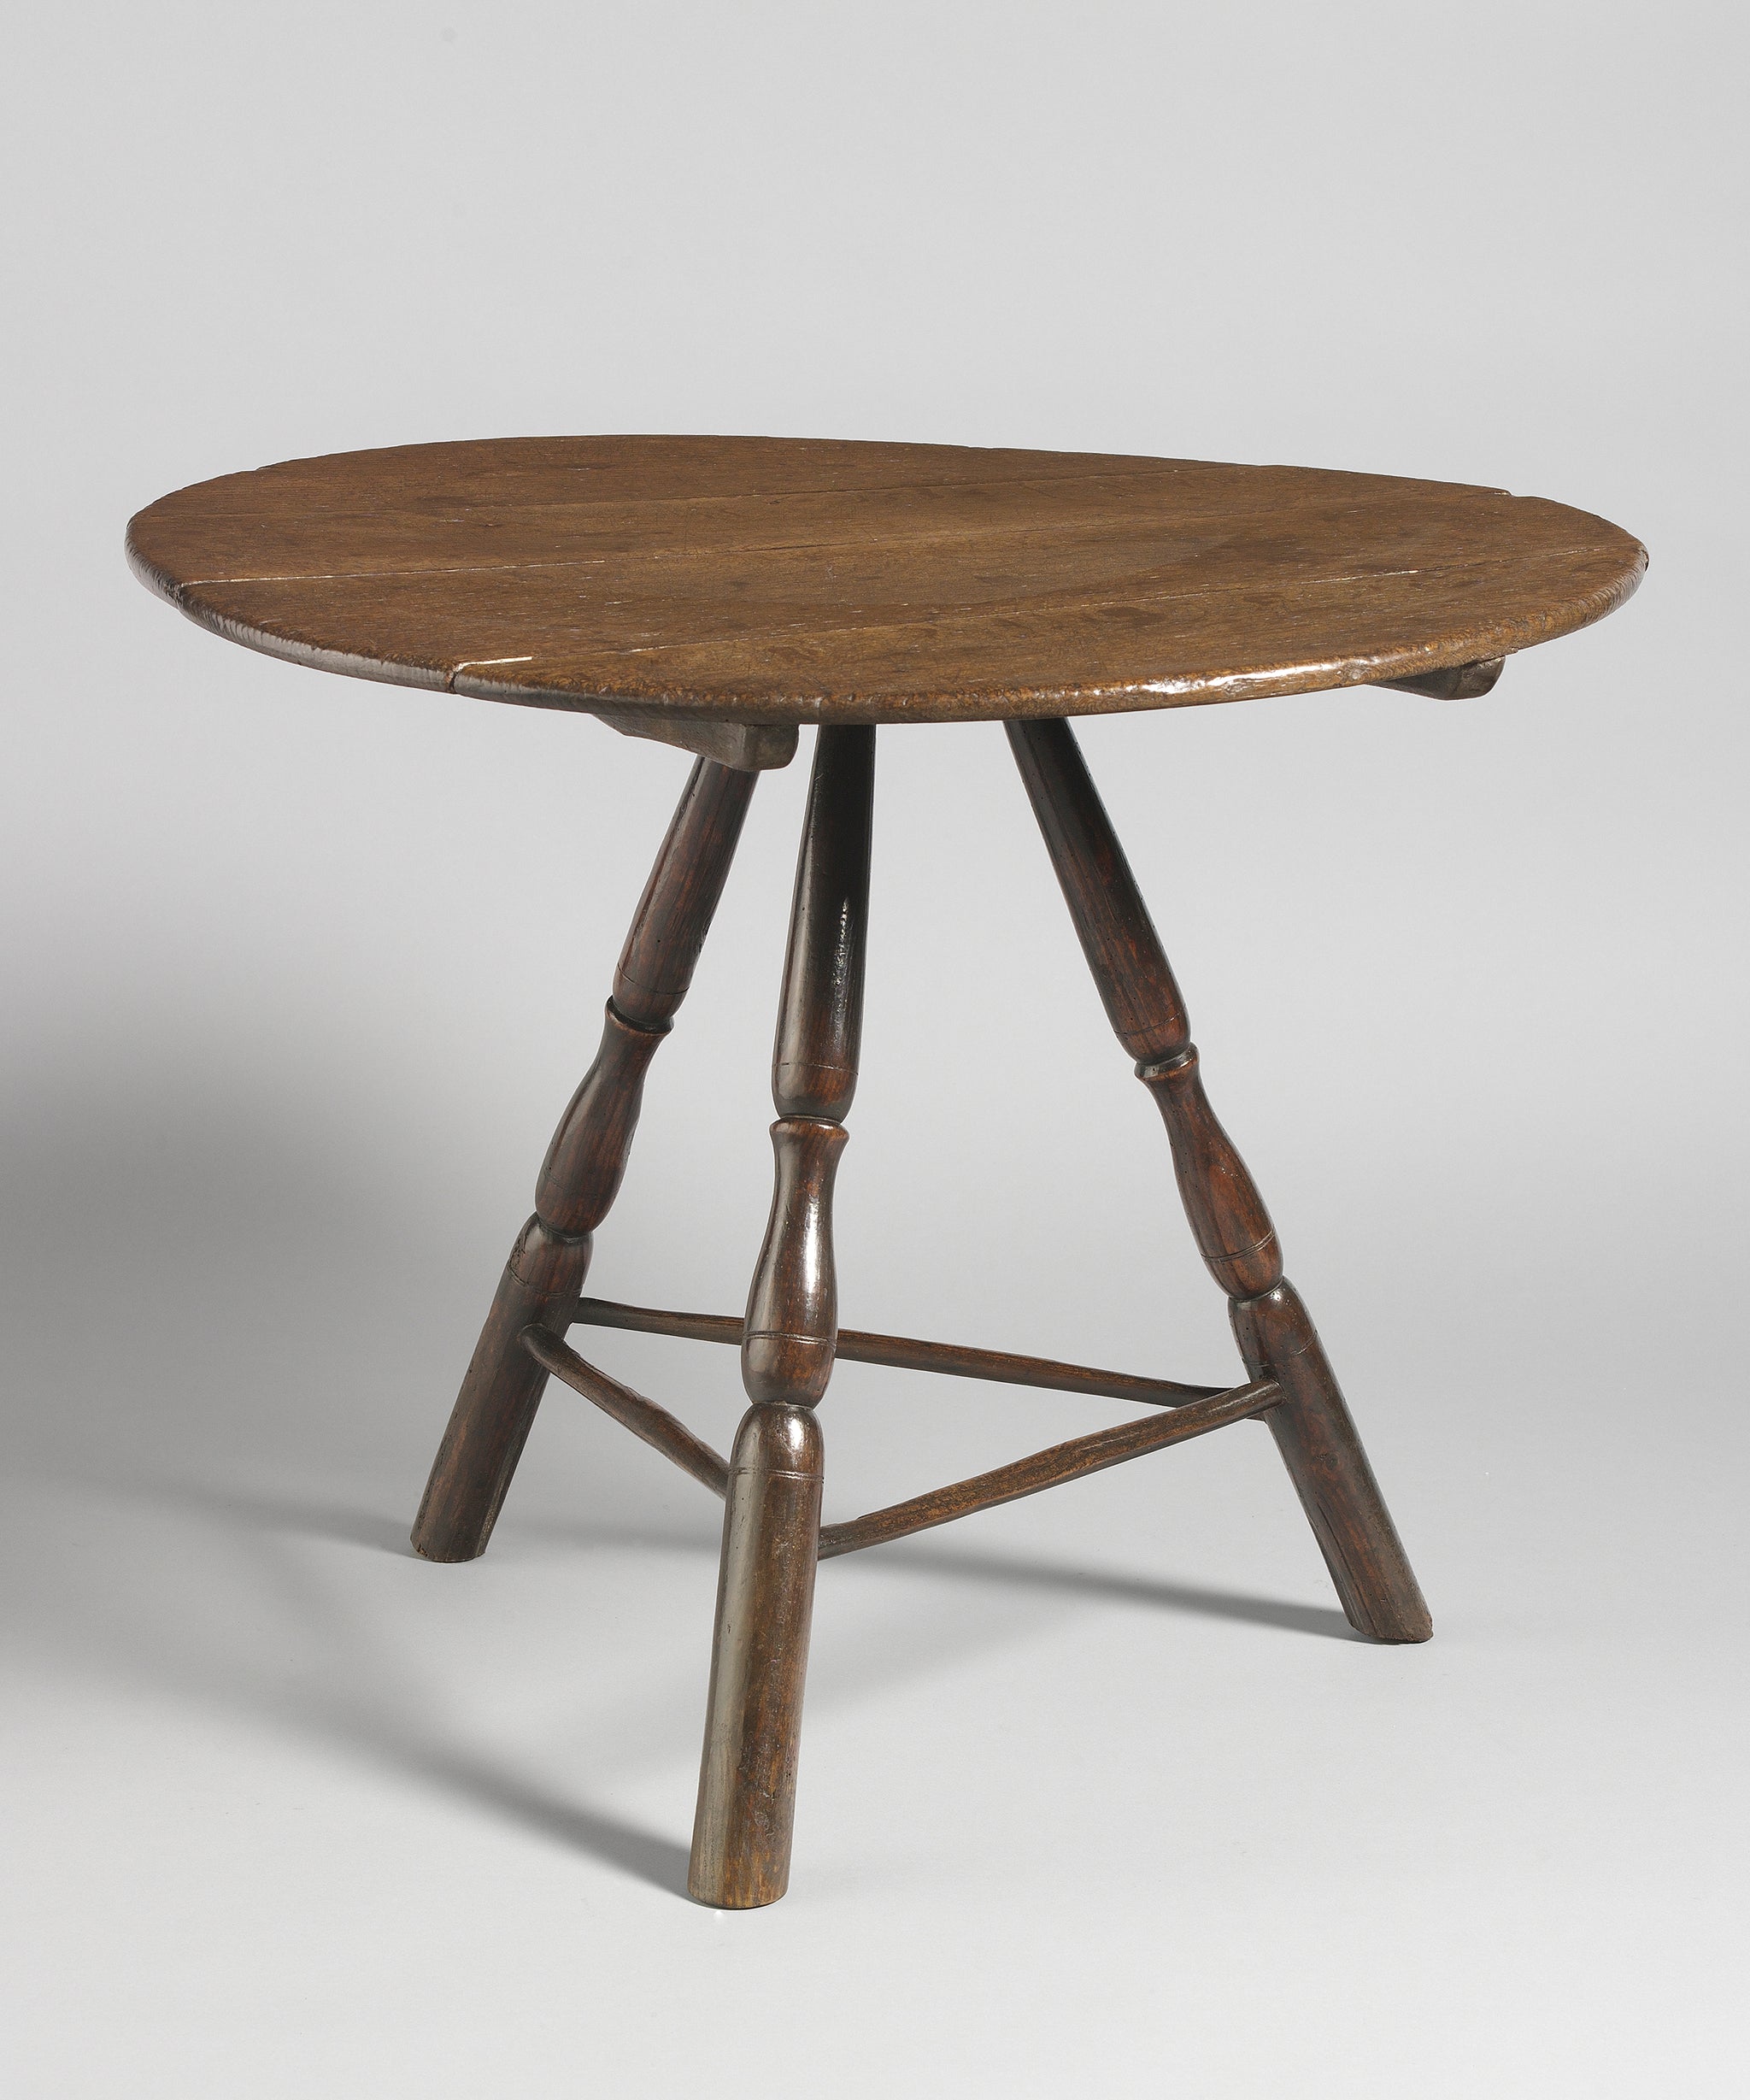 Early Oval Cricket Table